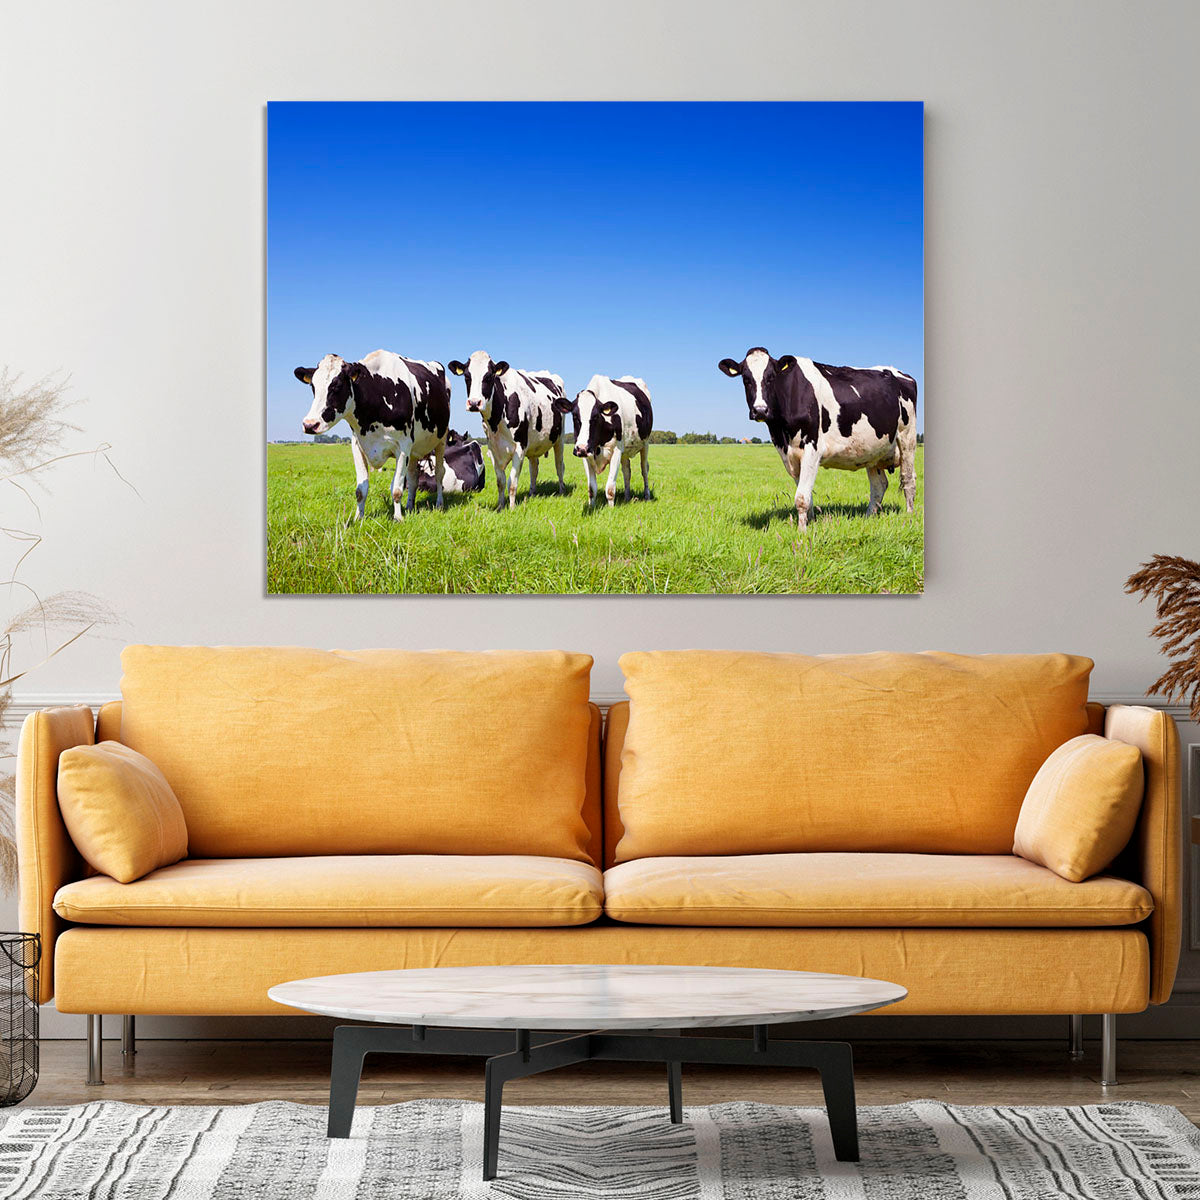 Black and white cows in a grassy field Canvas Print or Poster - Canvas Art Rocks - 4